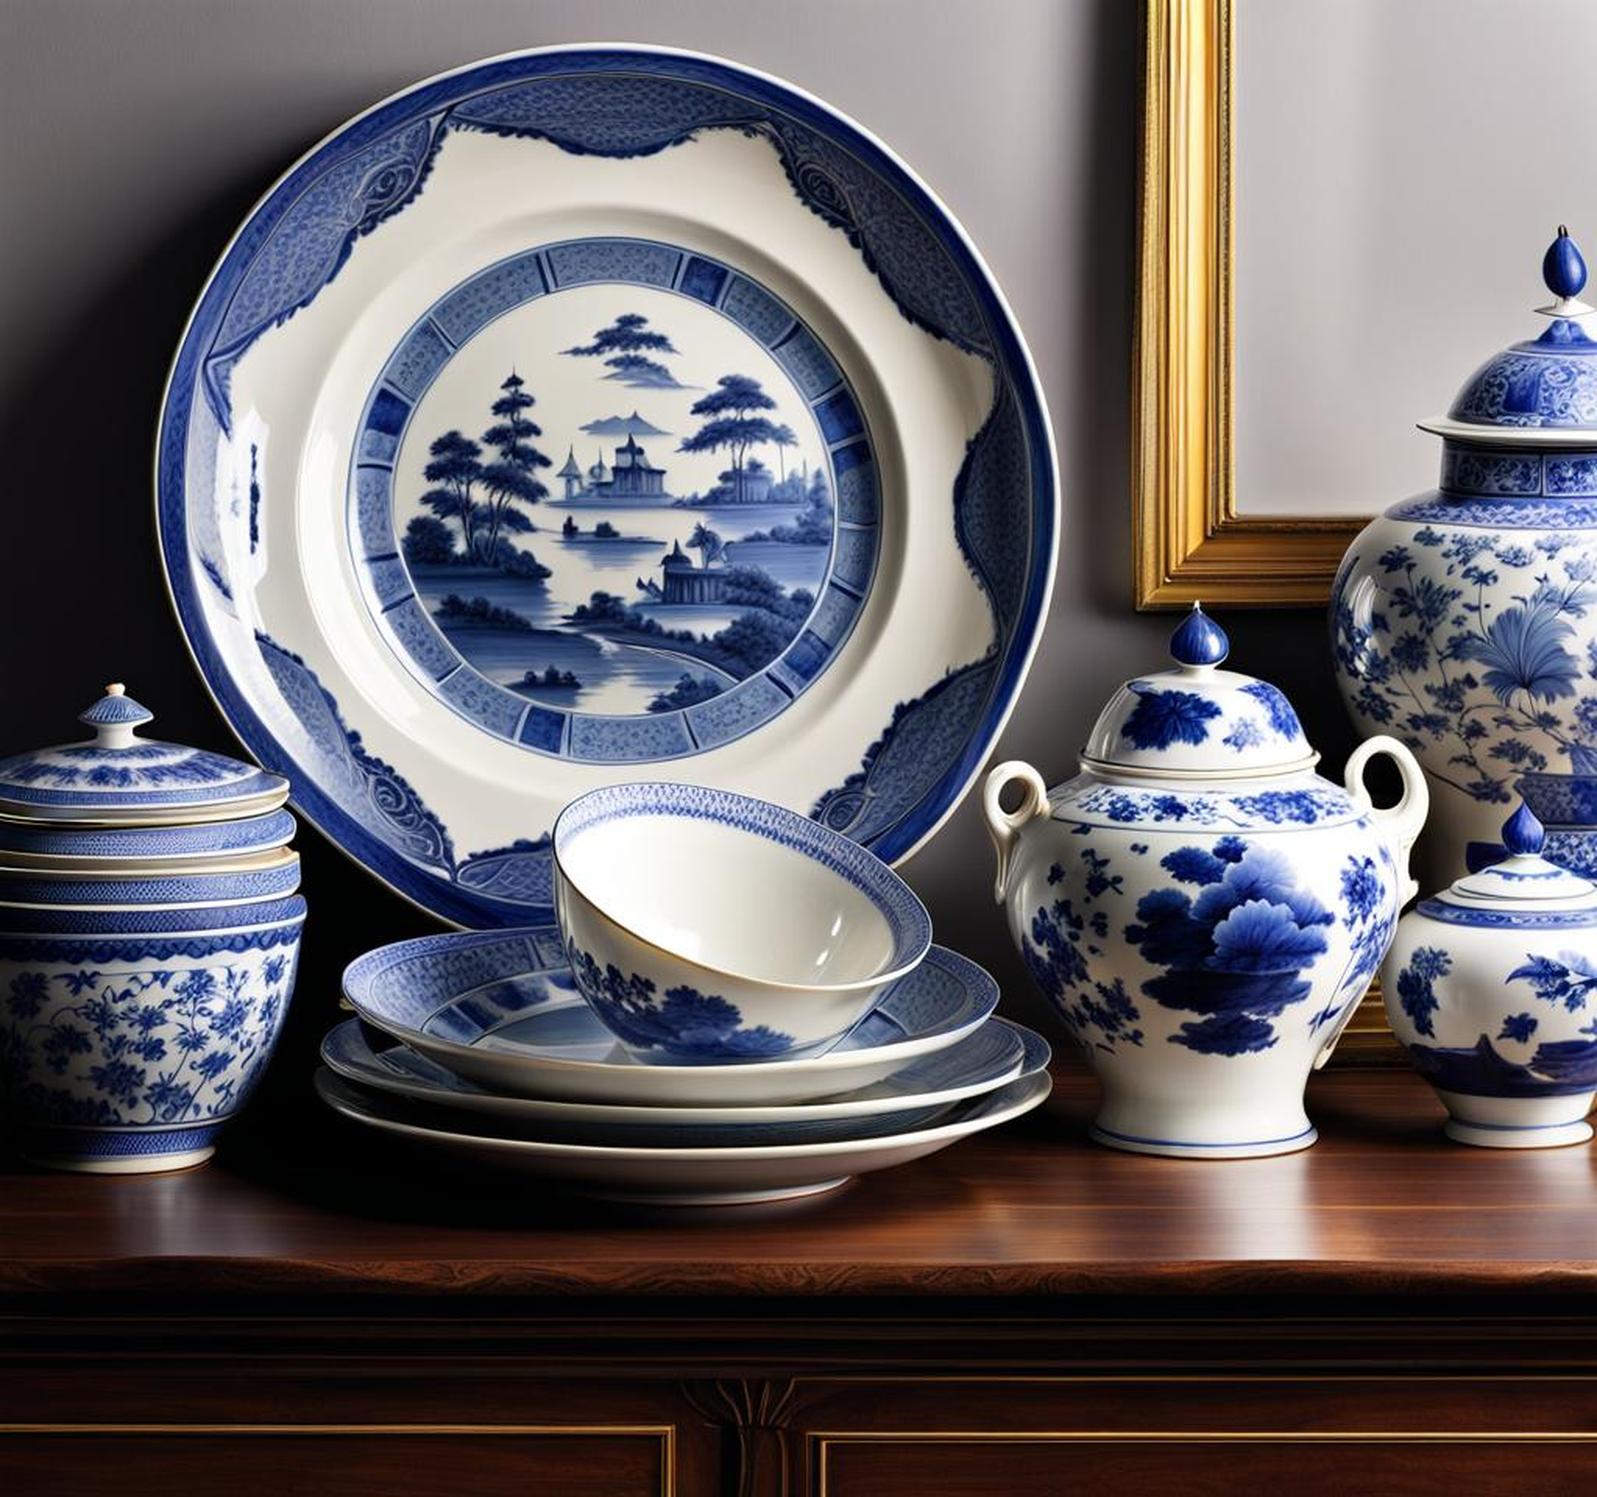 decorating with blue and white porcelain